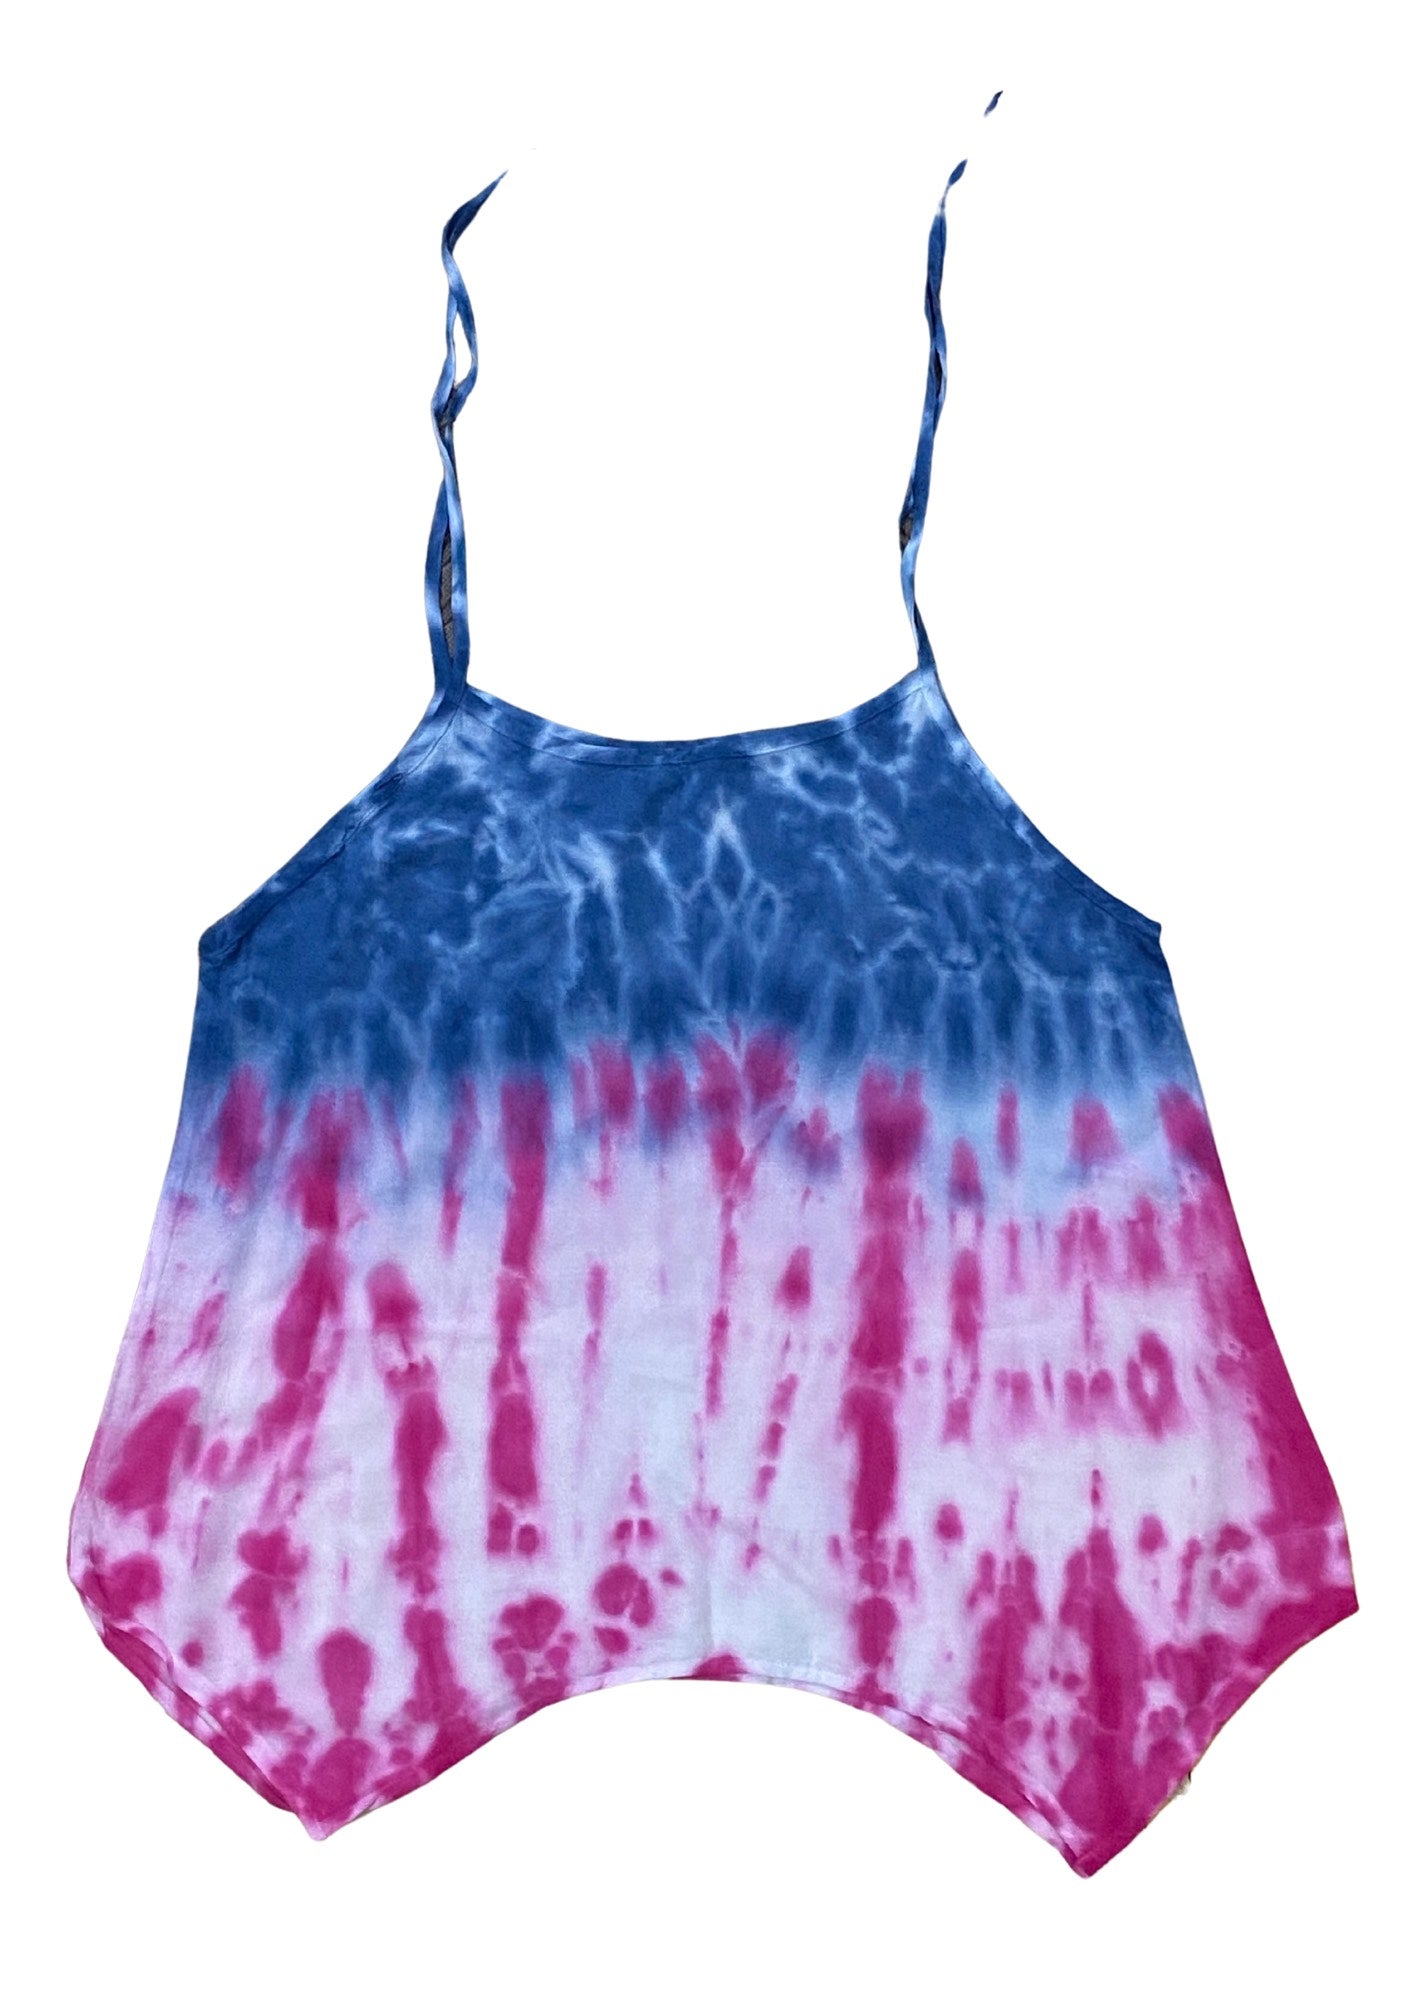 Cami Camisole Teen & Women, One Size Free Size Fit 0 to 8, Handmade Tie Dyed - American Flag